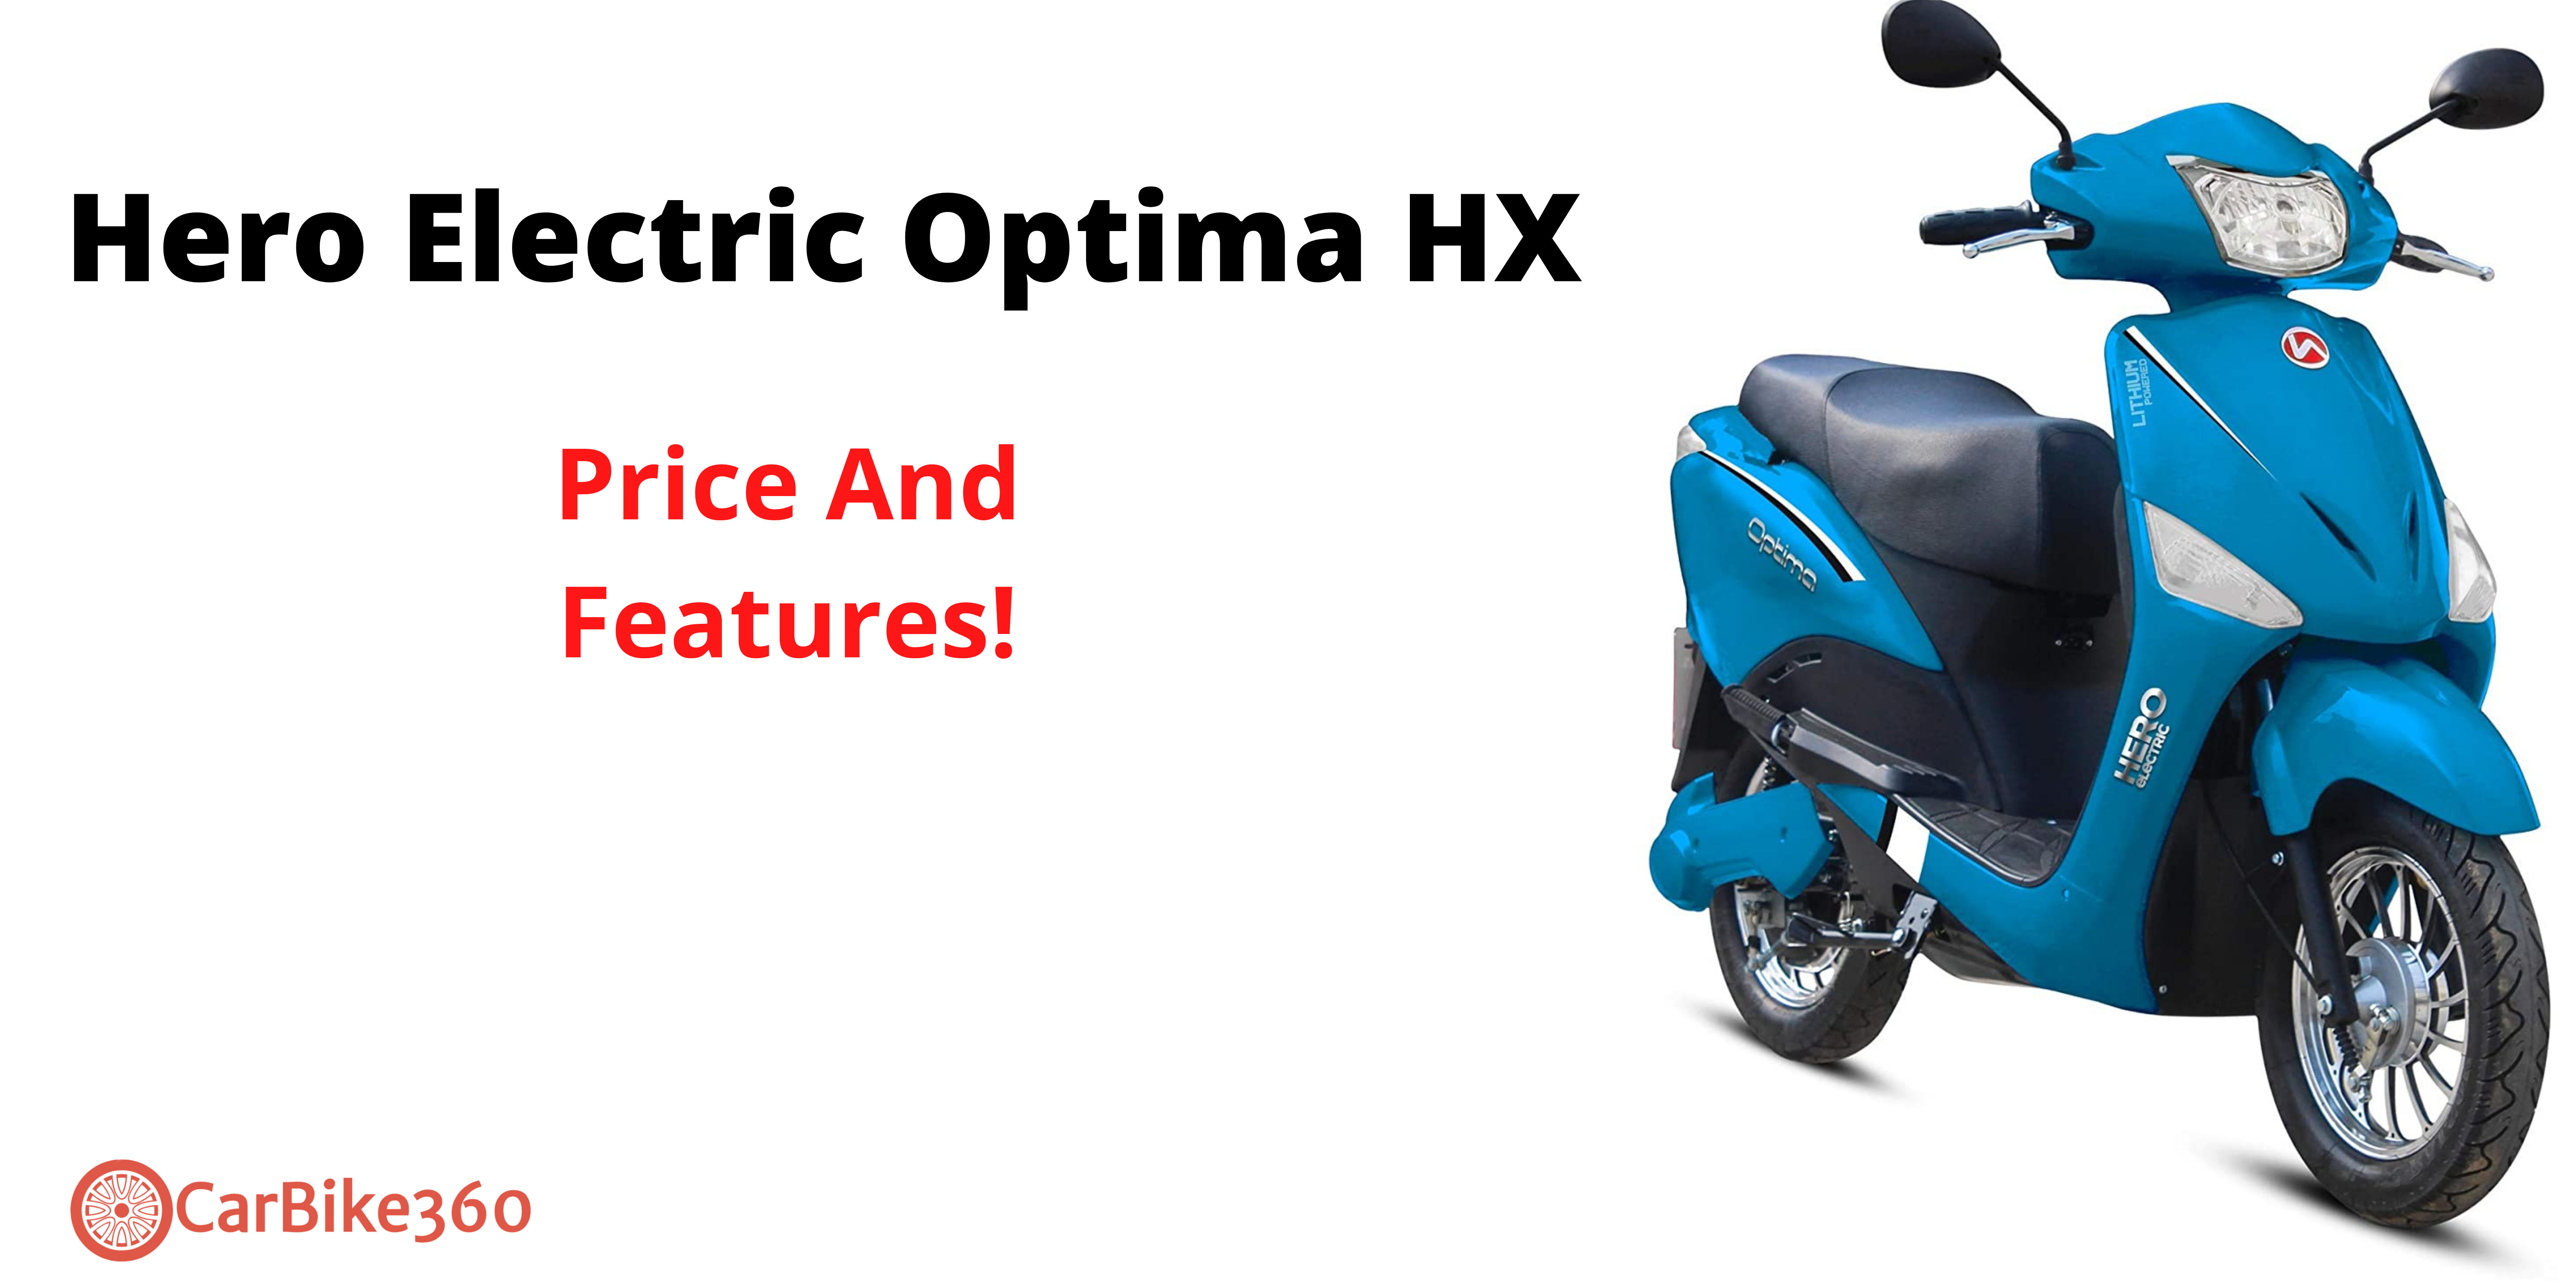 Hero Electric Optima HX Has Introduced With The Cruise Control Feature